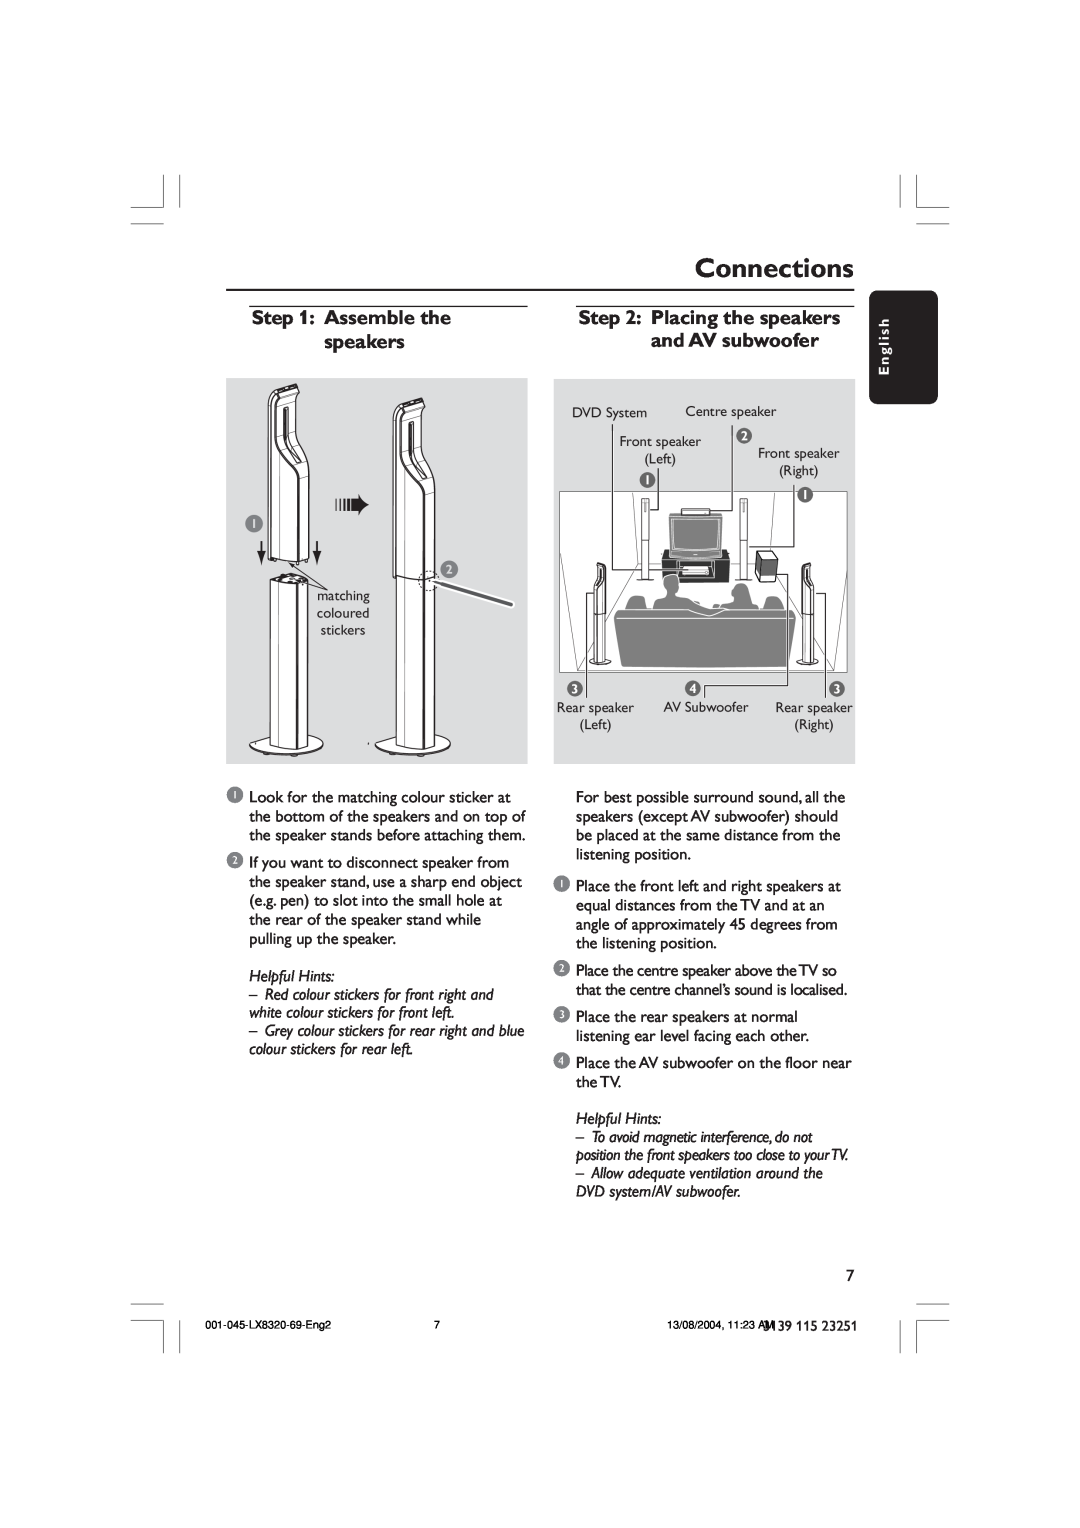 Philips LX8320 user manual Assemble the, Placing the speakers, and AV subwoofer, Connections, Helpful Hints, English 